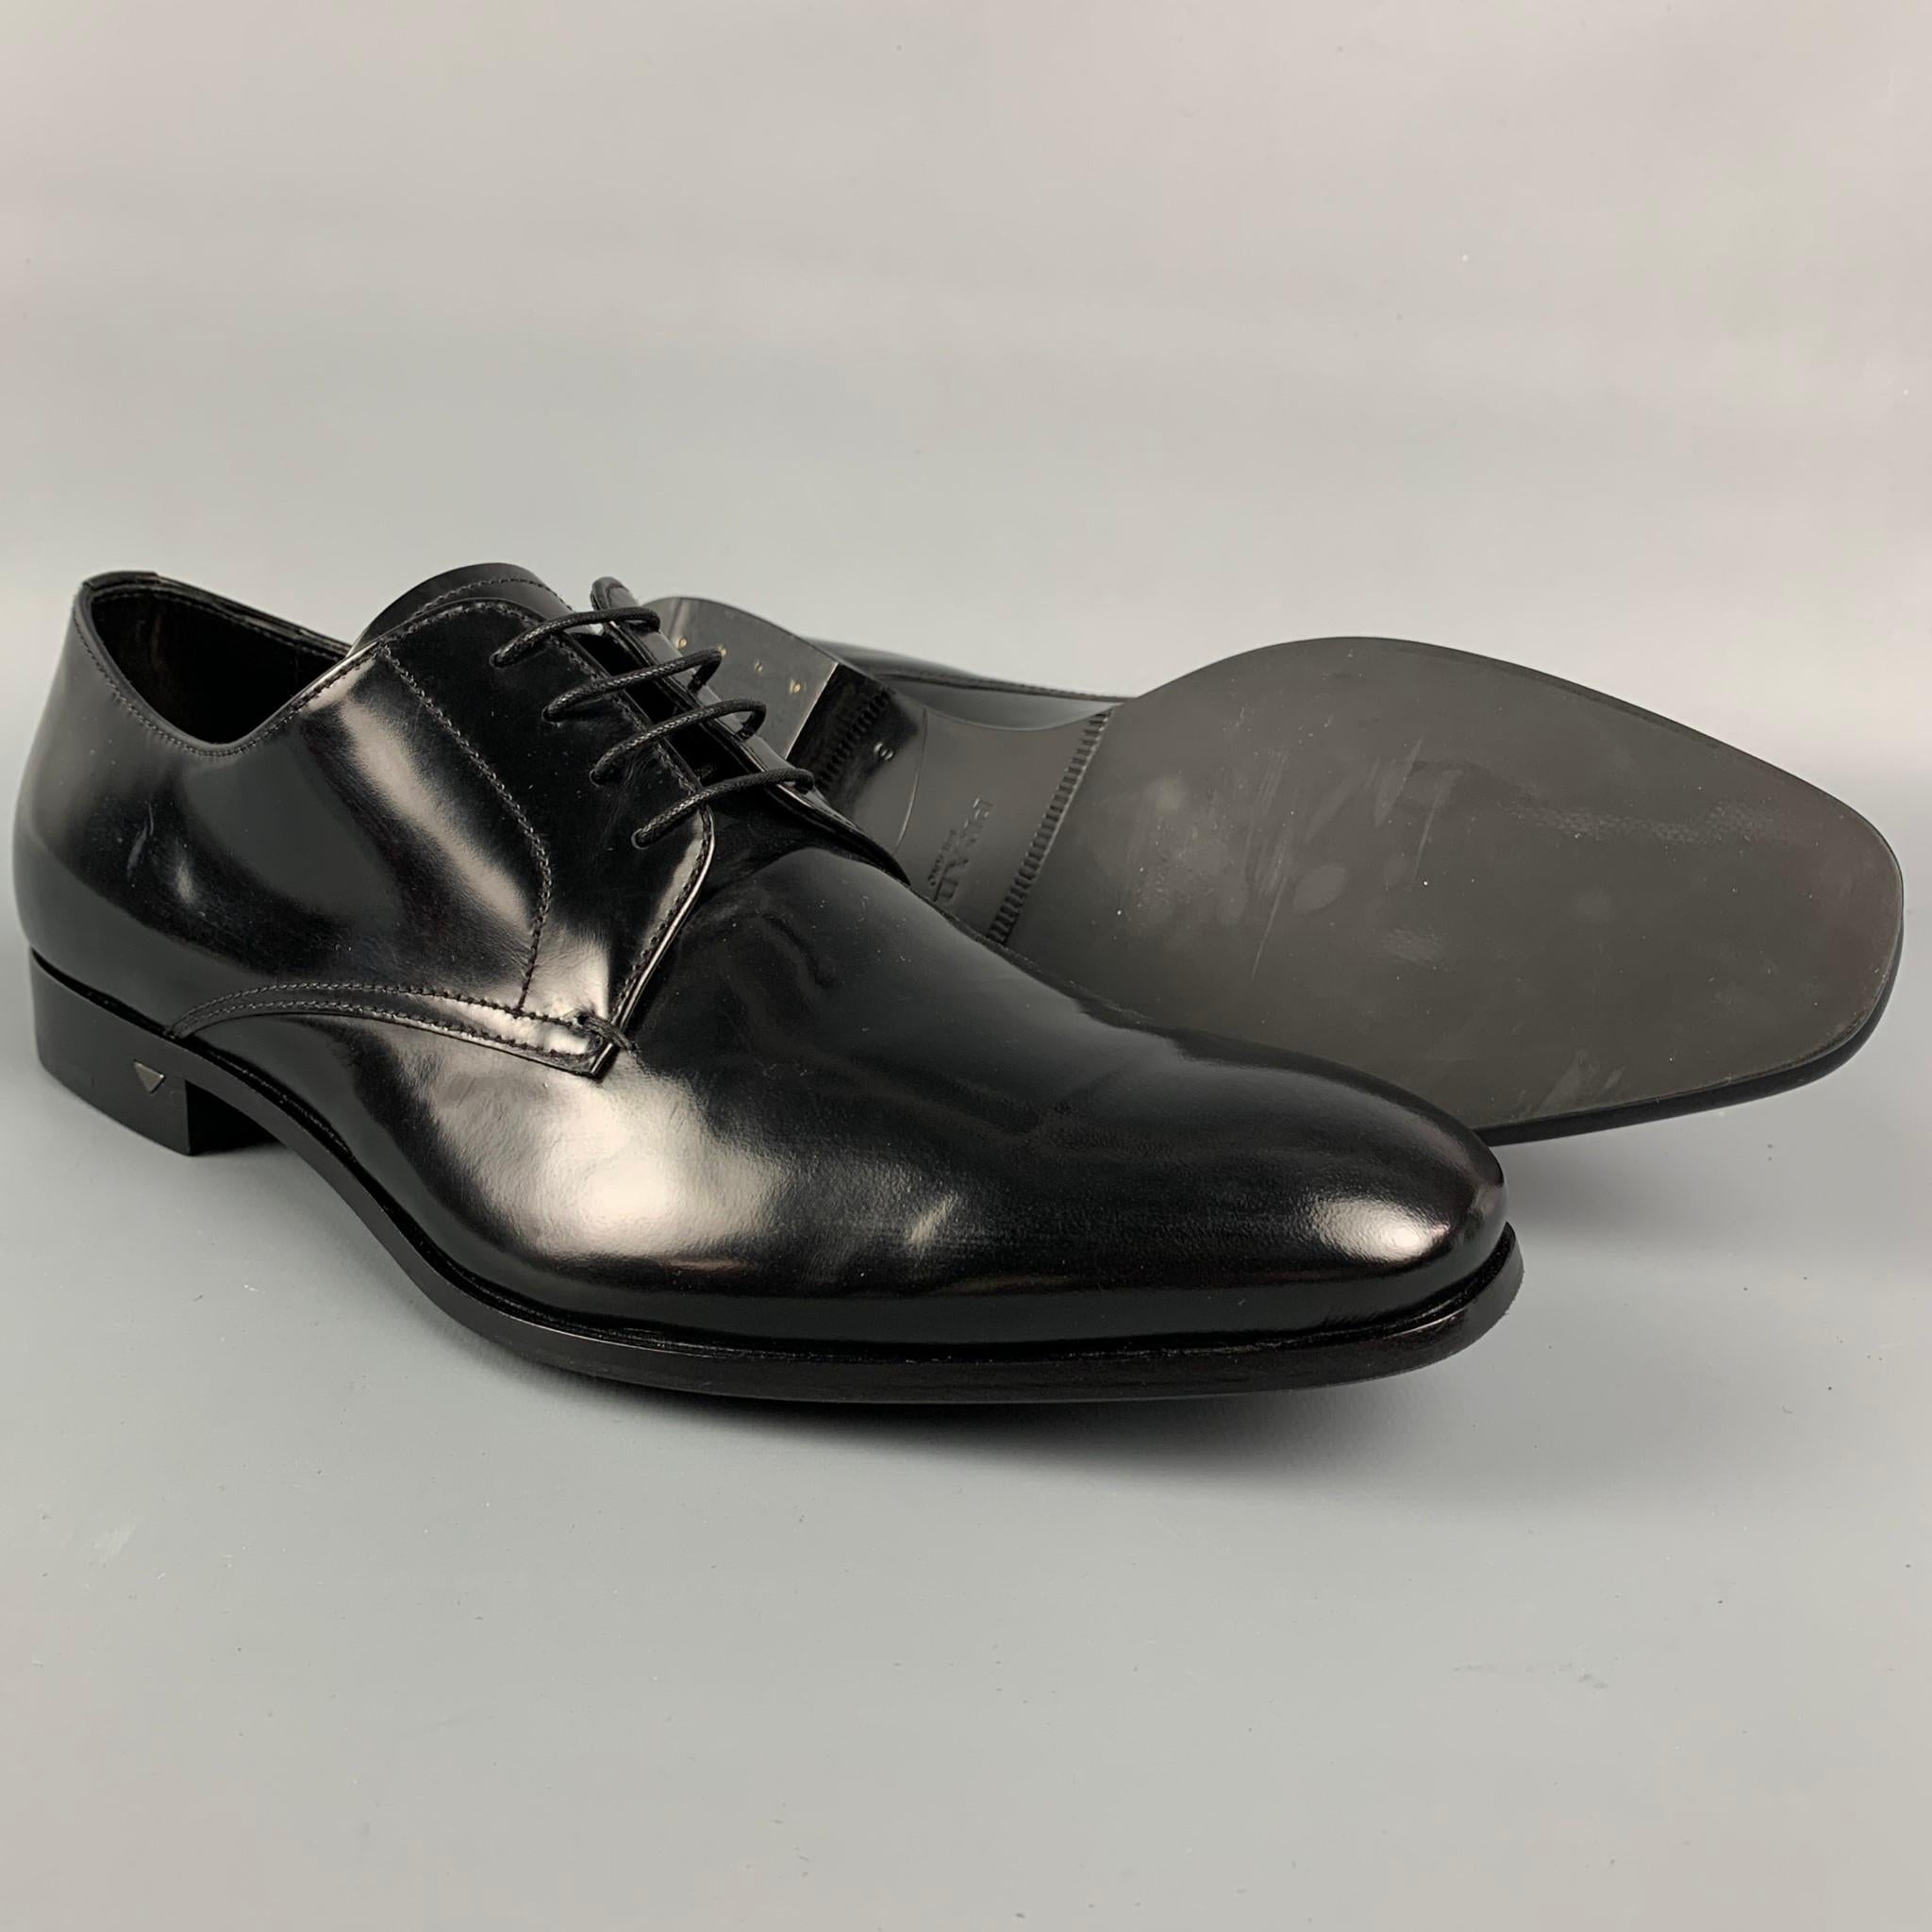 PRADA Size 7 Black Patent Leather Oxford Lace Up Shoes 3